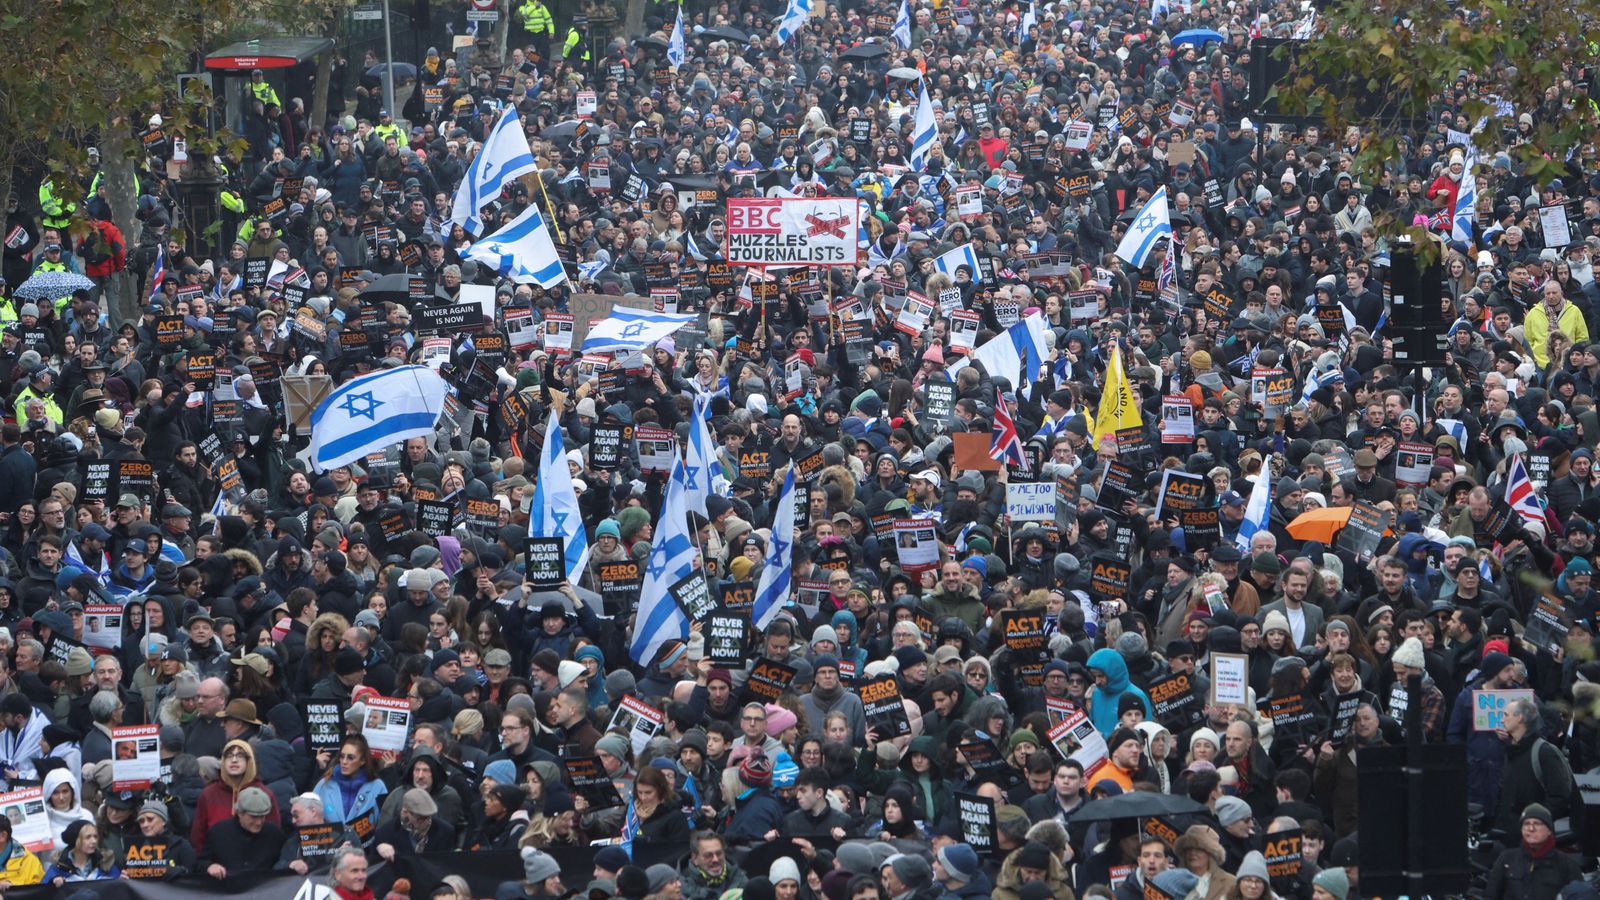 Israel-Hamas war: Thousands take to London streets in march against antisemitism